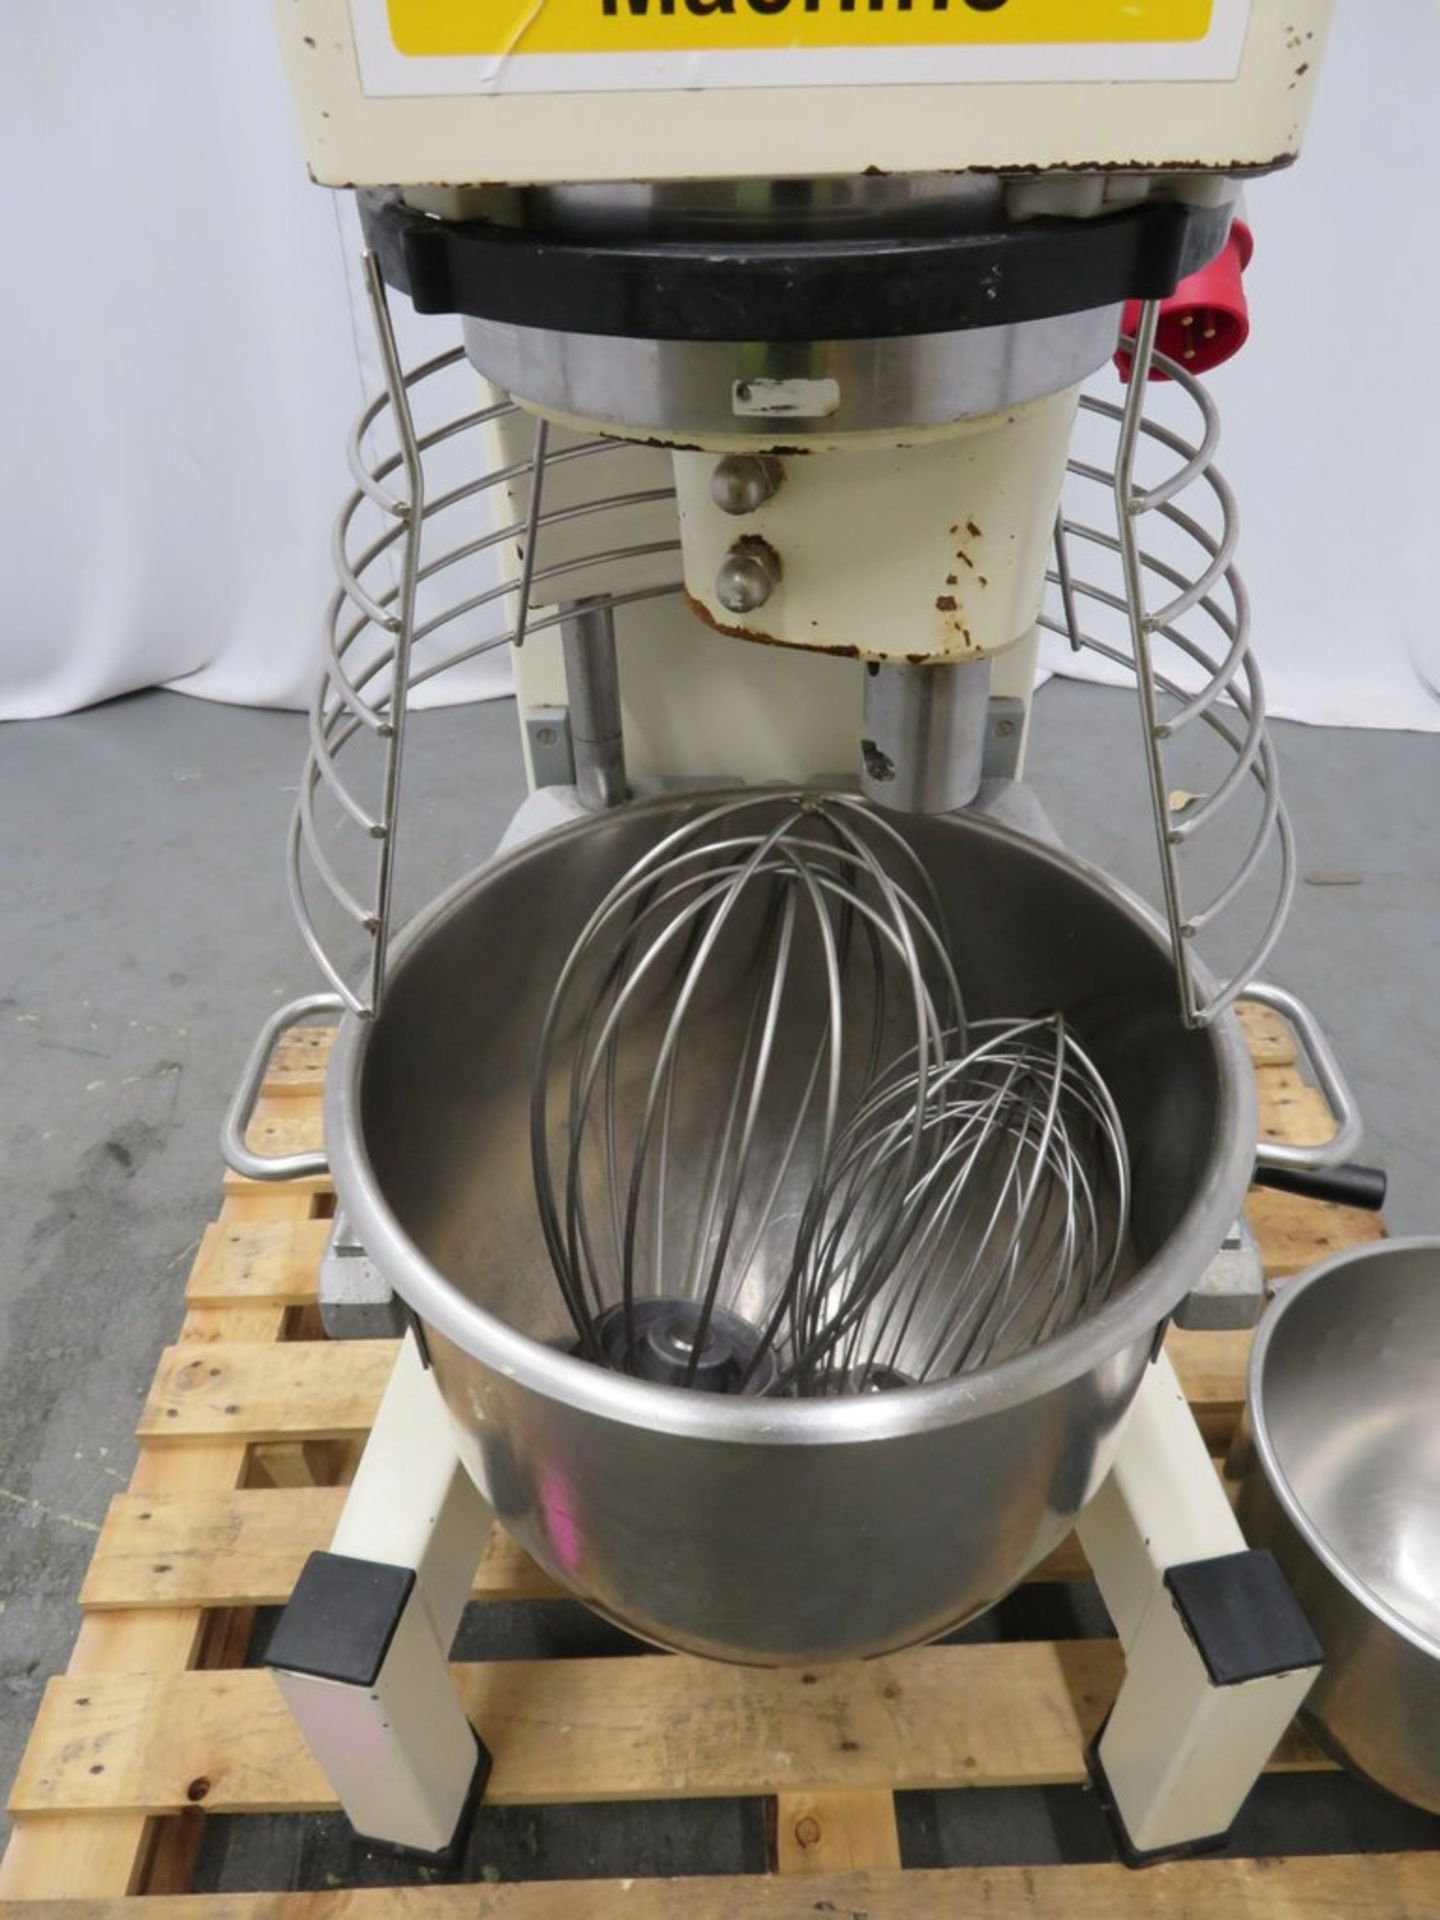 Electrolux Dito MB40S mixer, 40 litre bowl, with whisk attachments, 3 phase electric - Image 4 of 14